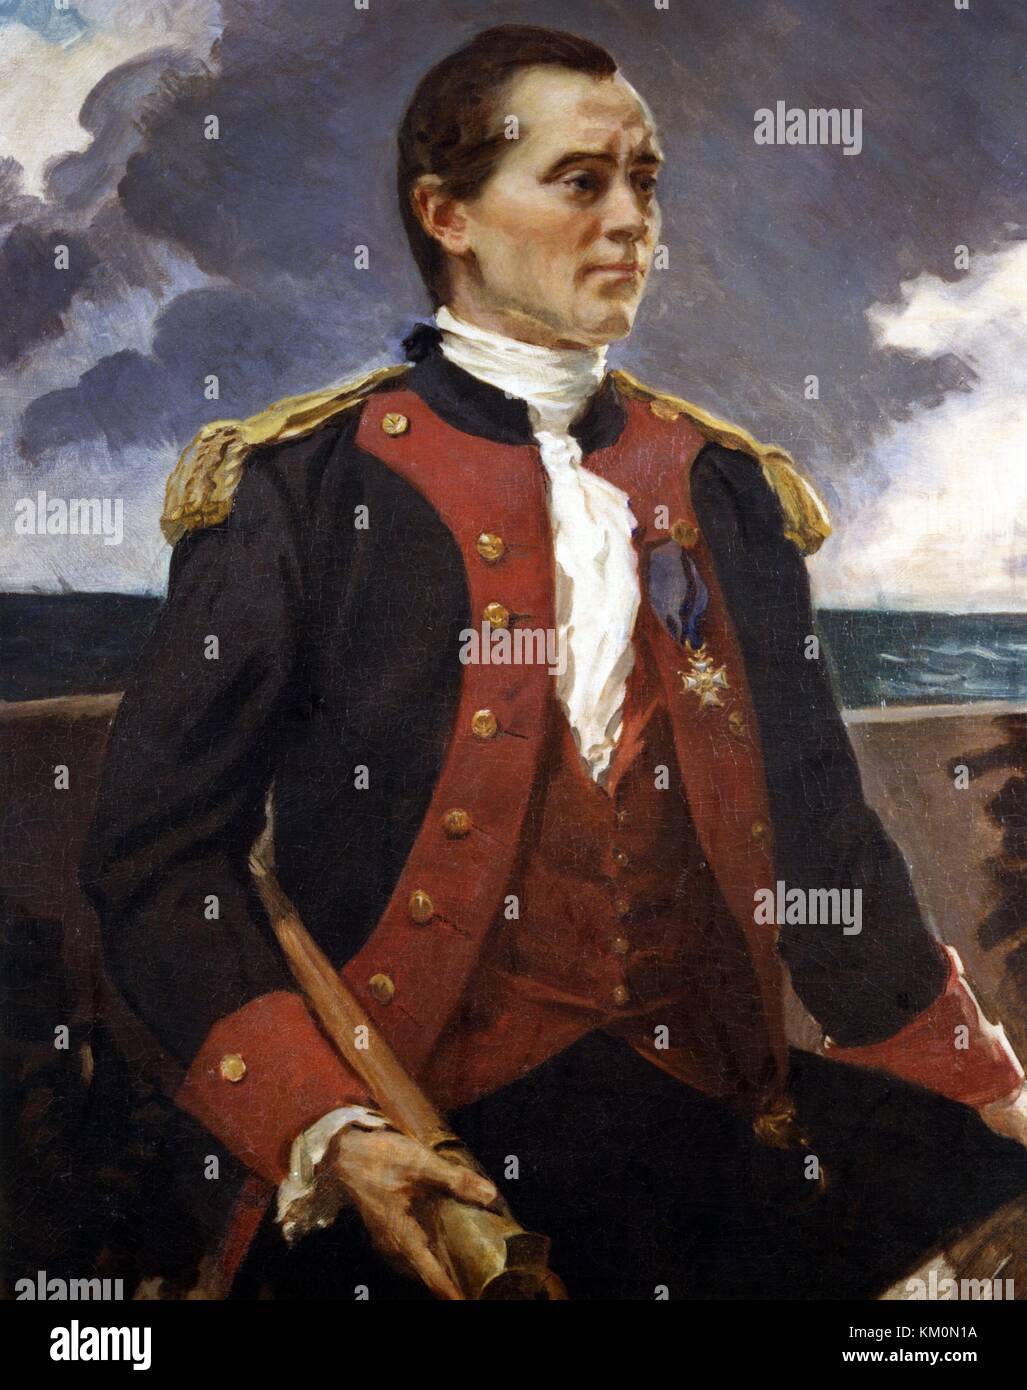 Oil painting of Captain John Paul Jones, Continental Navy, (1747-1792) by artist Cecilia Beaux. Portrait  (1855-1942), 1906. The original painting is in the U.S. Naval Academy Museum, Annapolis, Maryland. Jones was a famed naval commander during the American Revolutionary War and is known as the 'Father of the American Navy'. Stock Photo